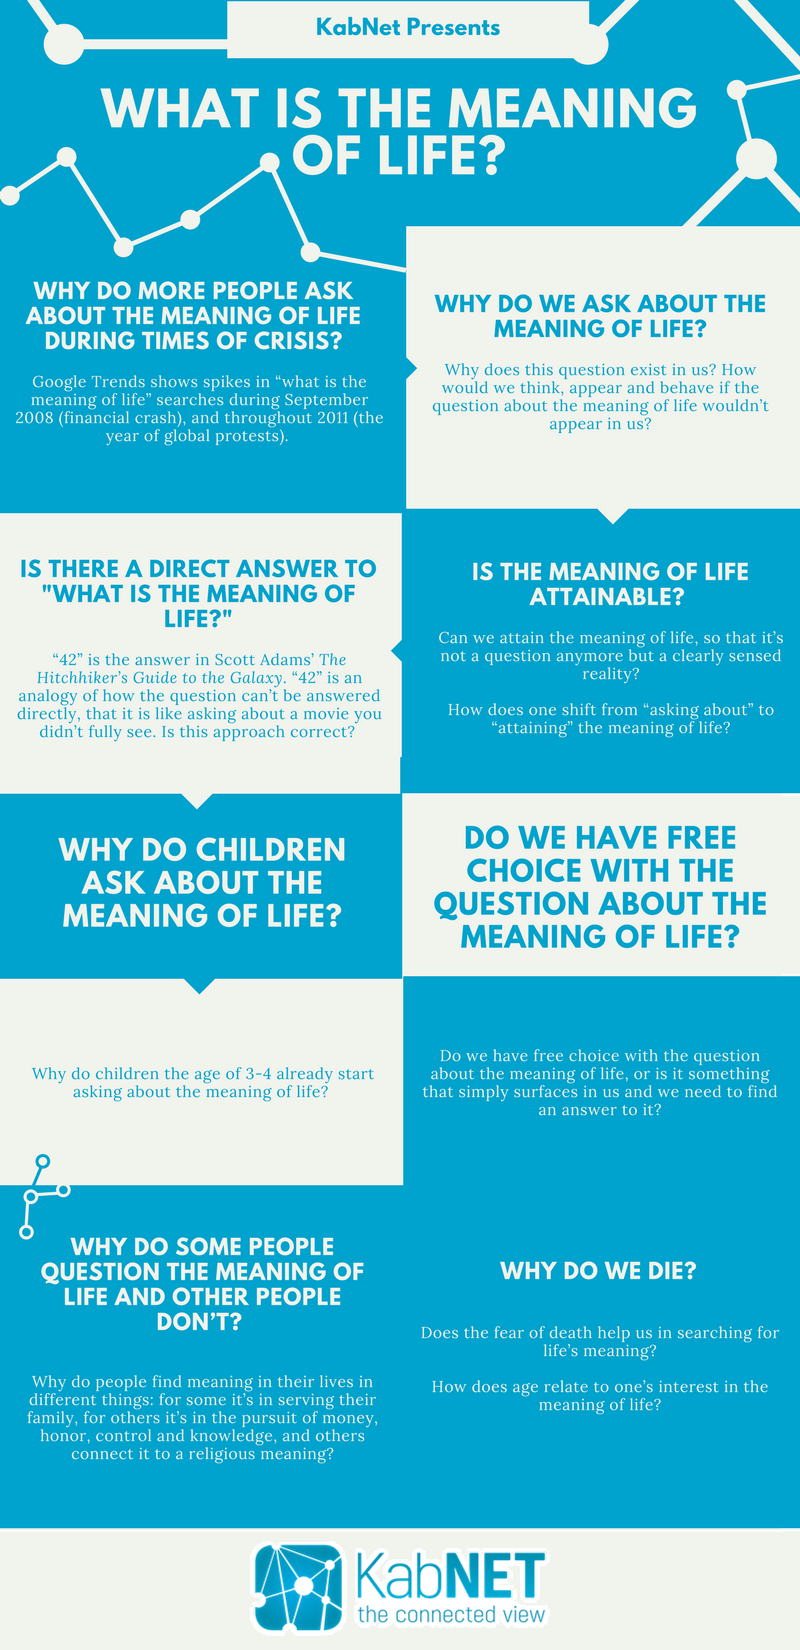 The meaning of life - #the_meaning_of_life